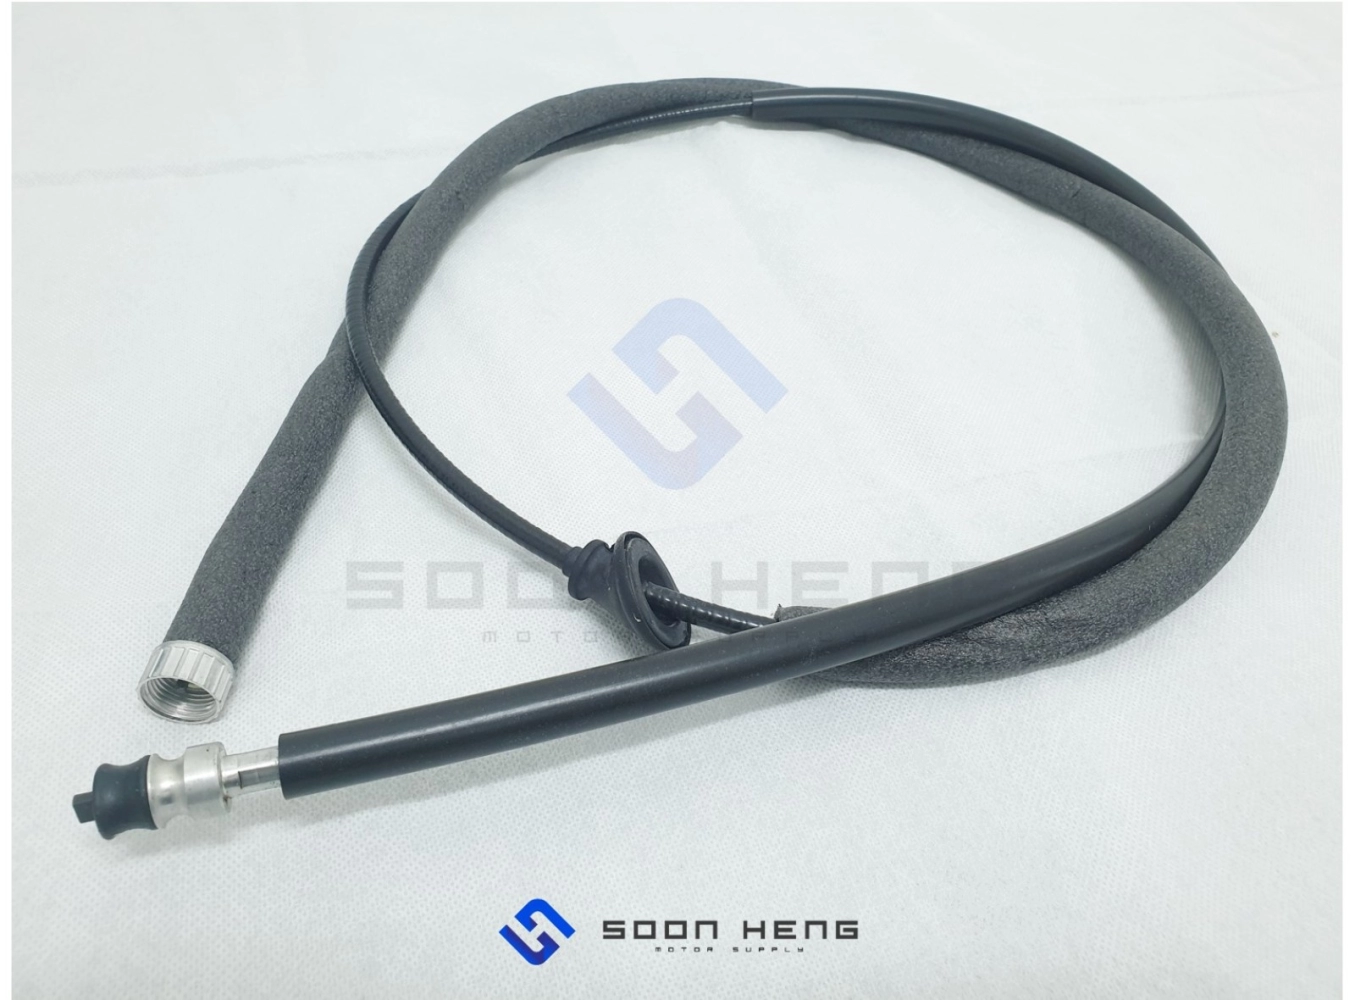 Mercedes-Benz C123, S123 and W123 - Speedometer Cable (GEMO)